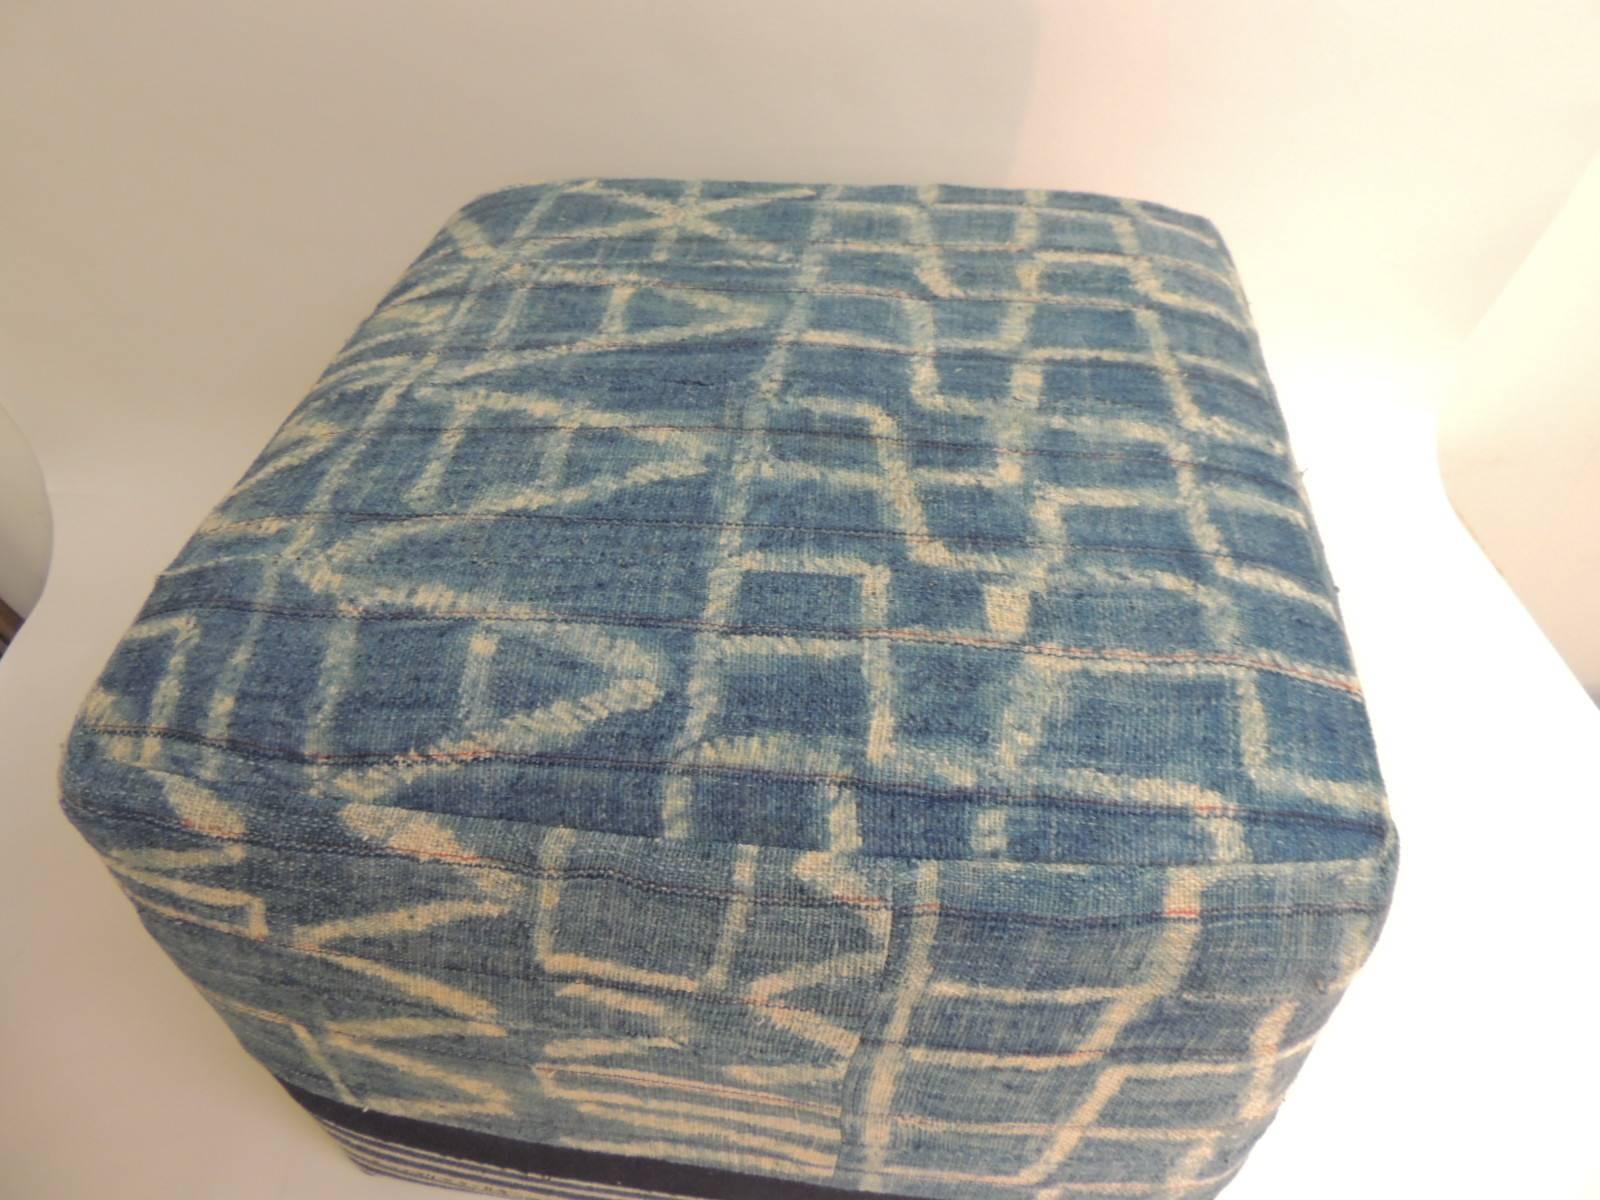 African blue and natural vintage textile re-upholstered square ottoman custom. Stripes of the African strip woven cotton were hand-sewn together in order to create this unique tribal pattern. The top and side panels are padded to give this piece a